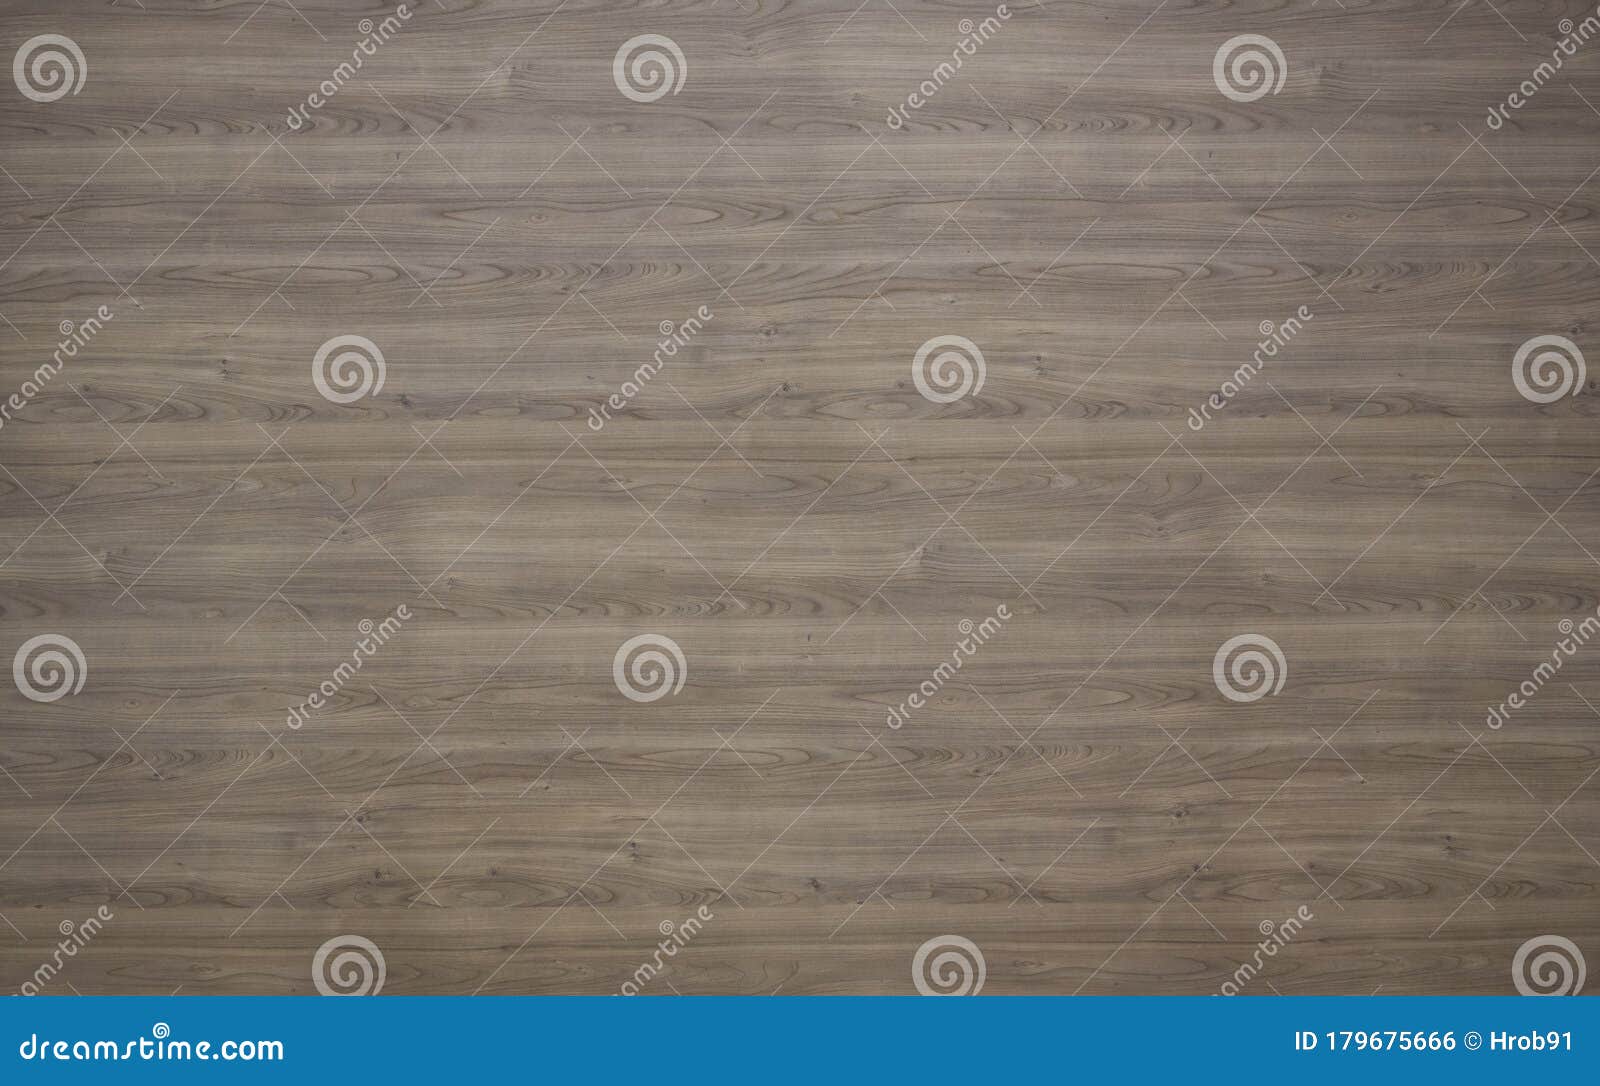 covering solid wood desk texture